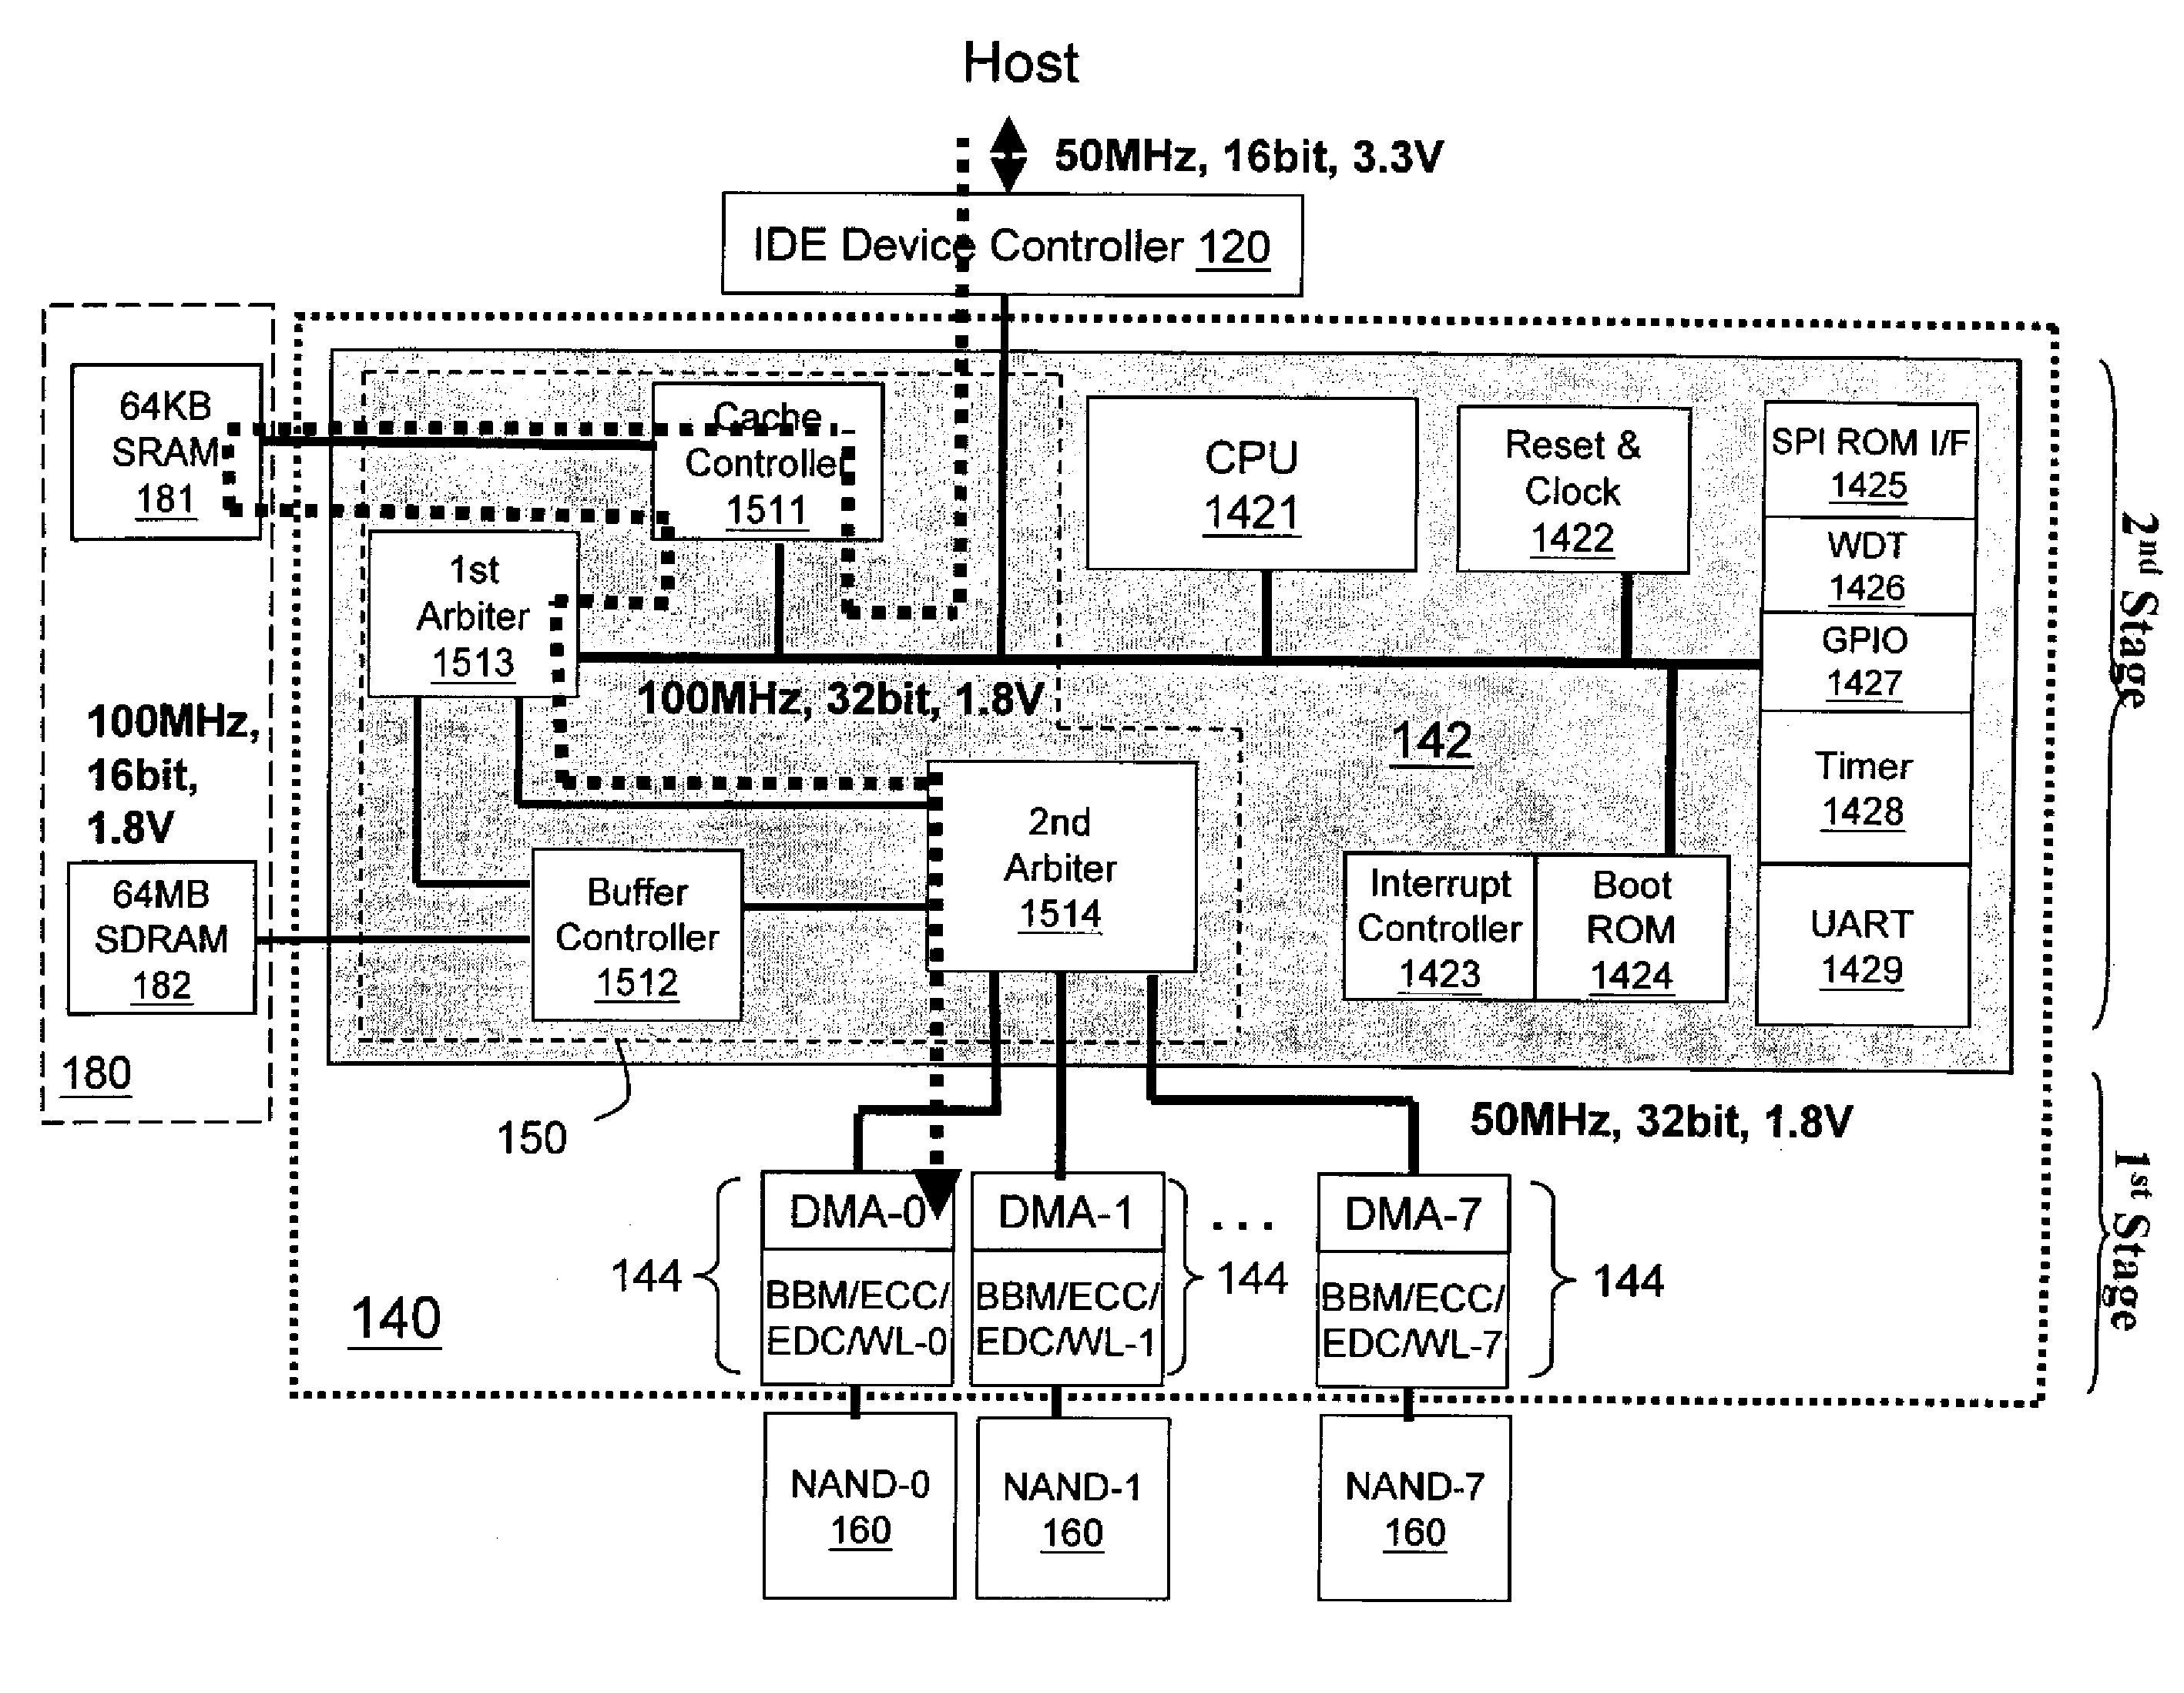 Non-volatile memory storage system with two-stage controller architecture